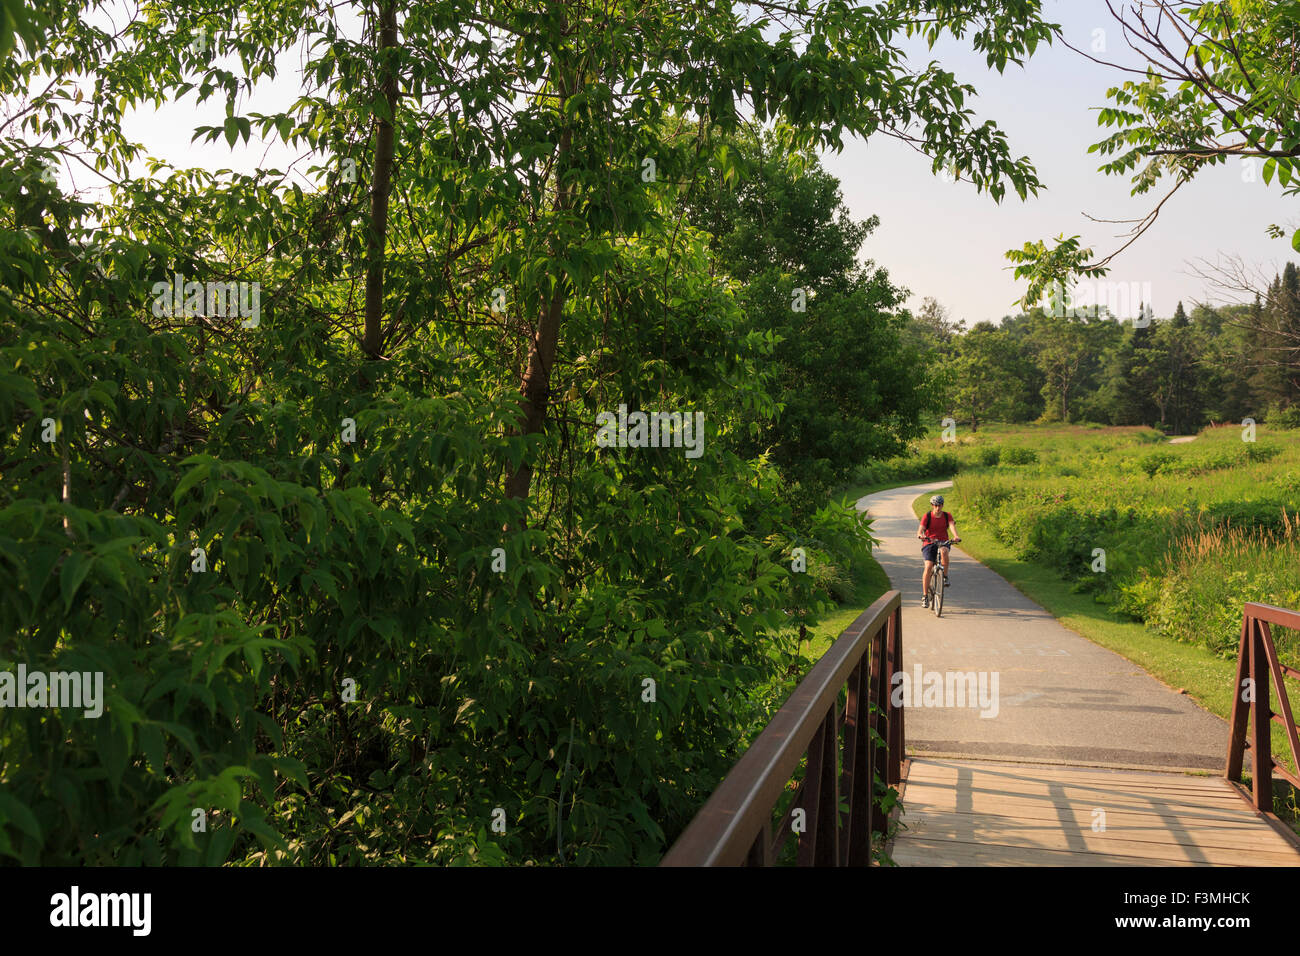 The Stowe Recreation Path, Stowe, New England, Vermont Stock Photo